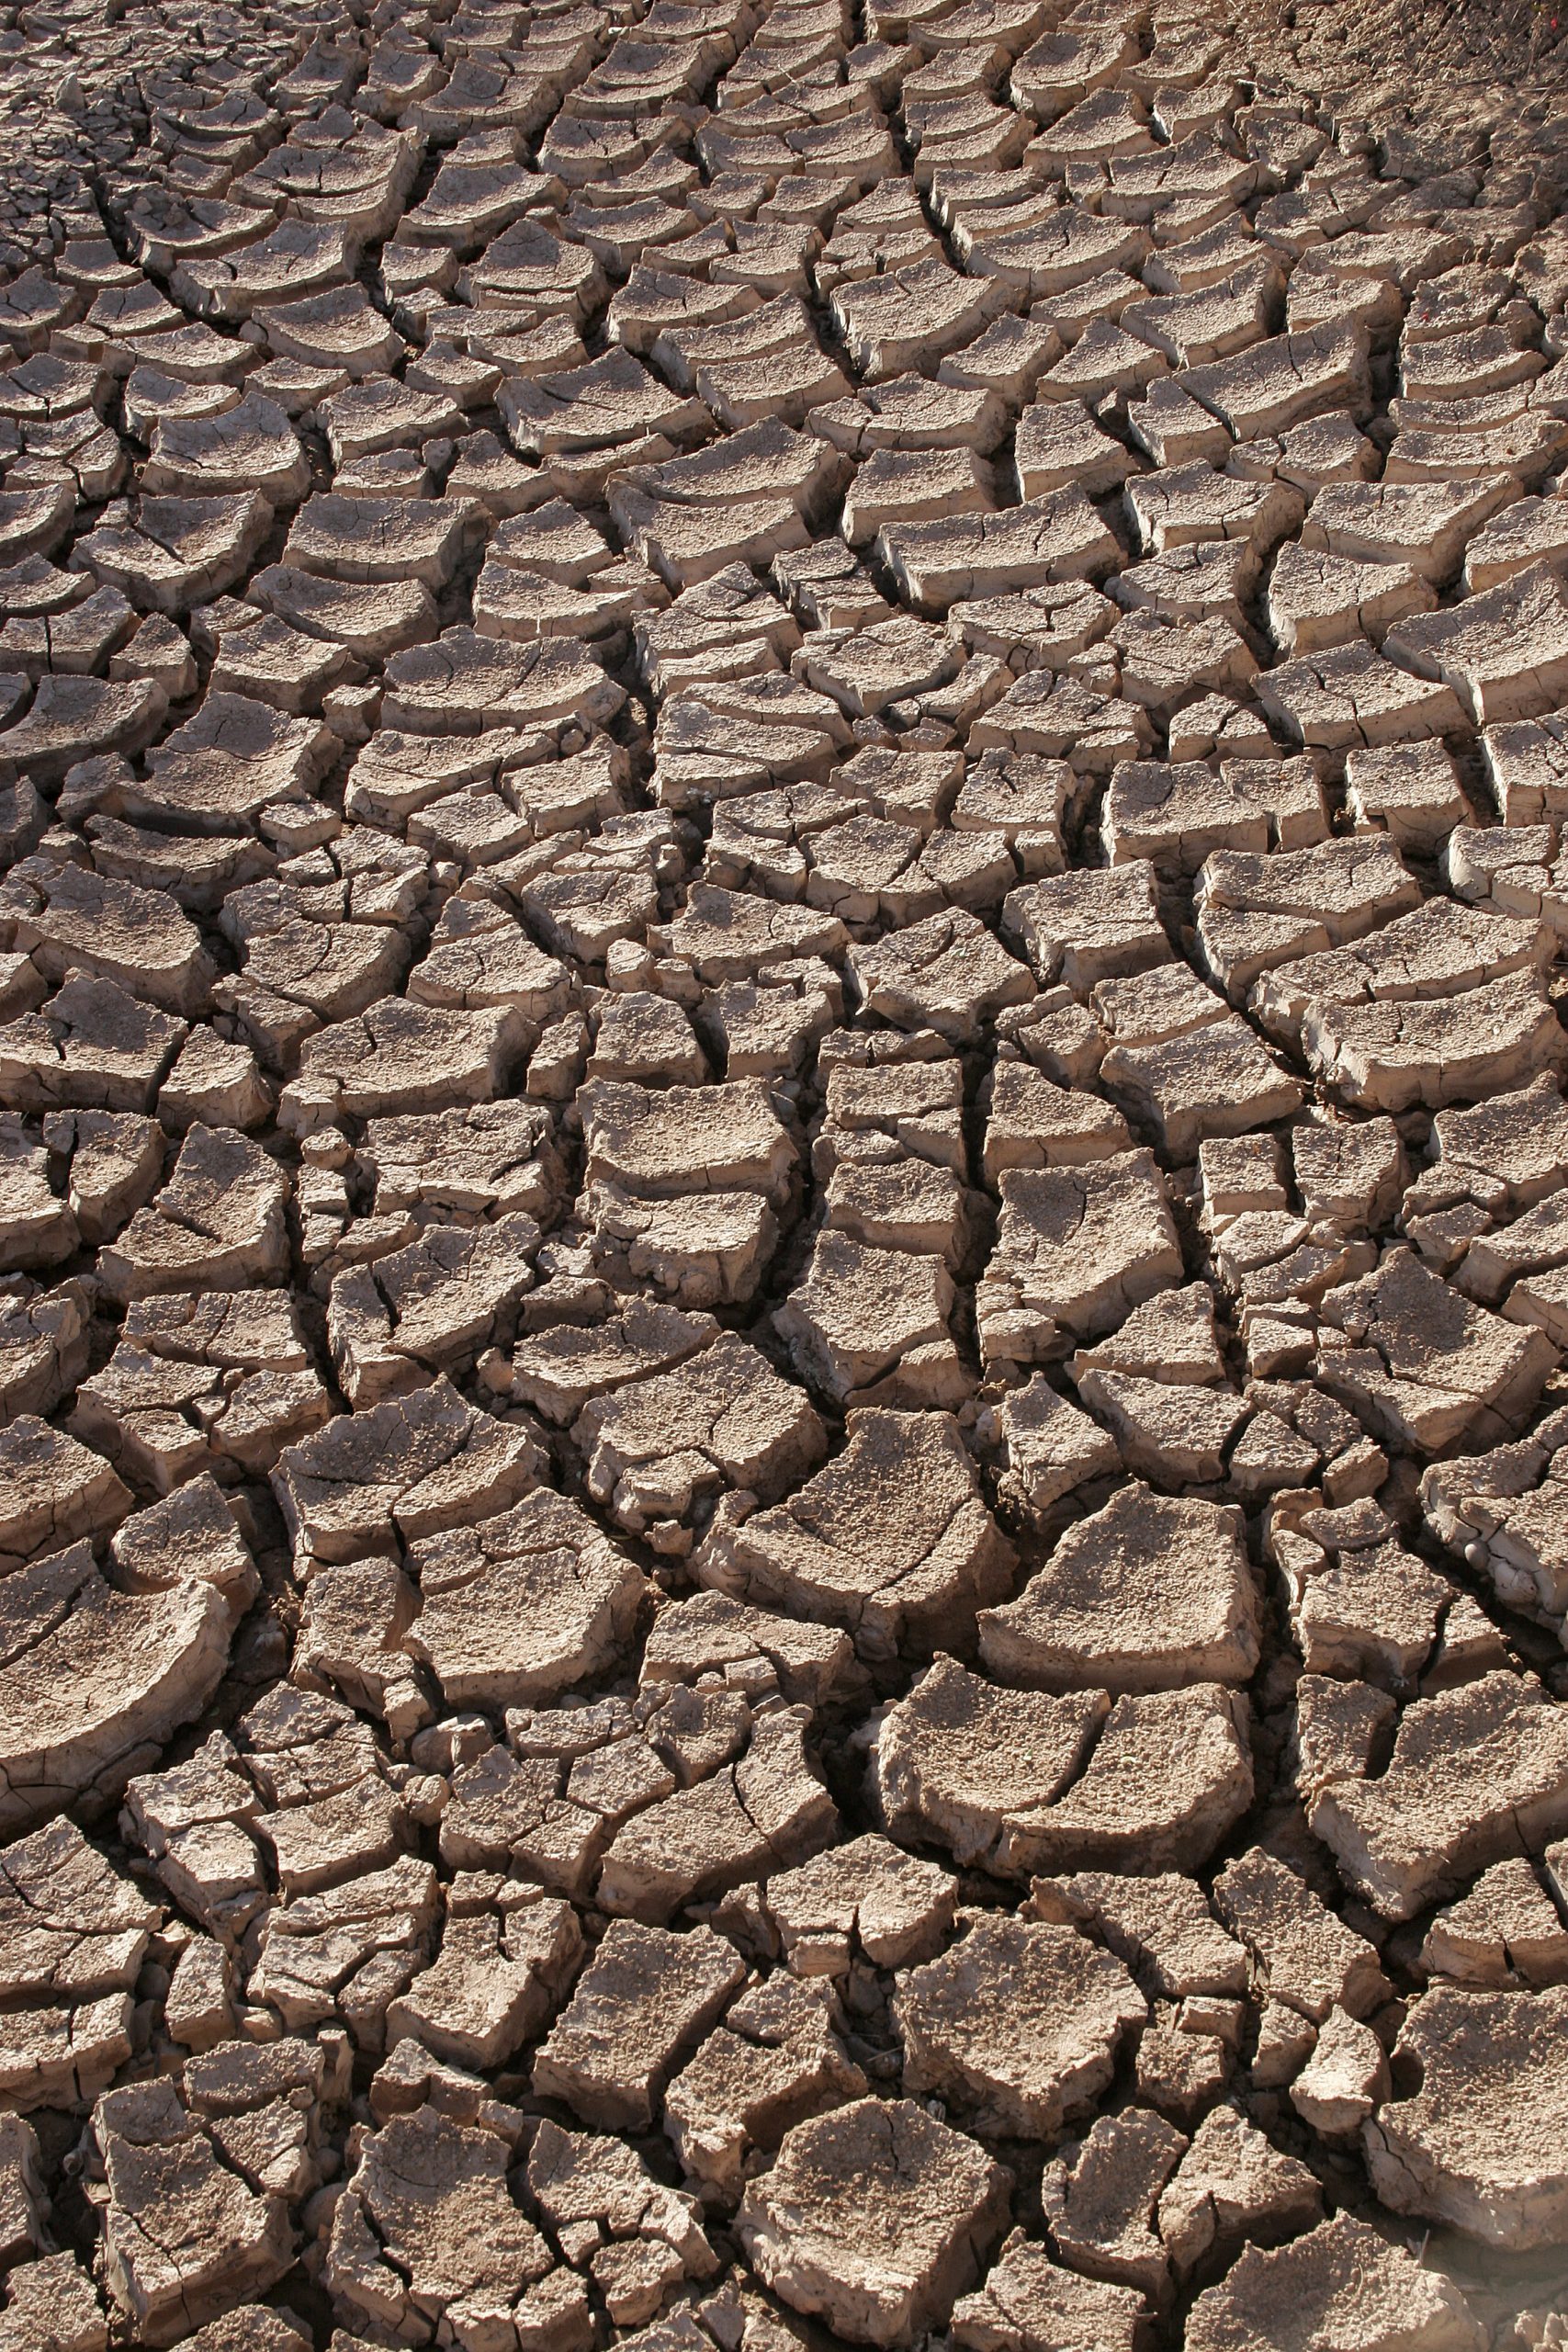 A drought for science?